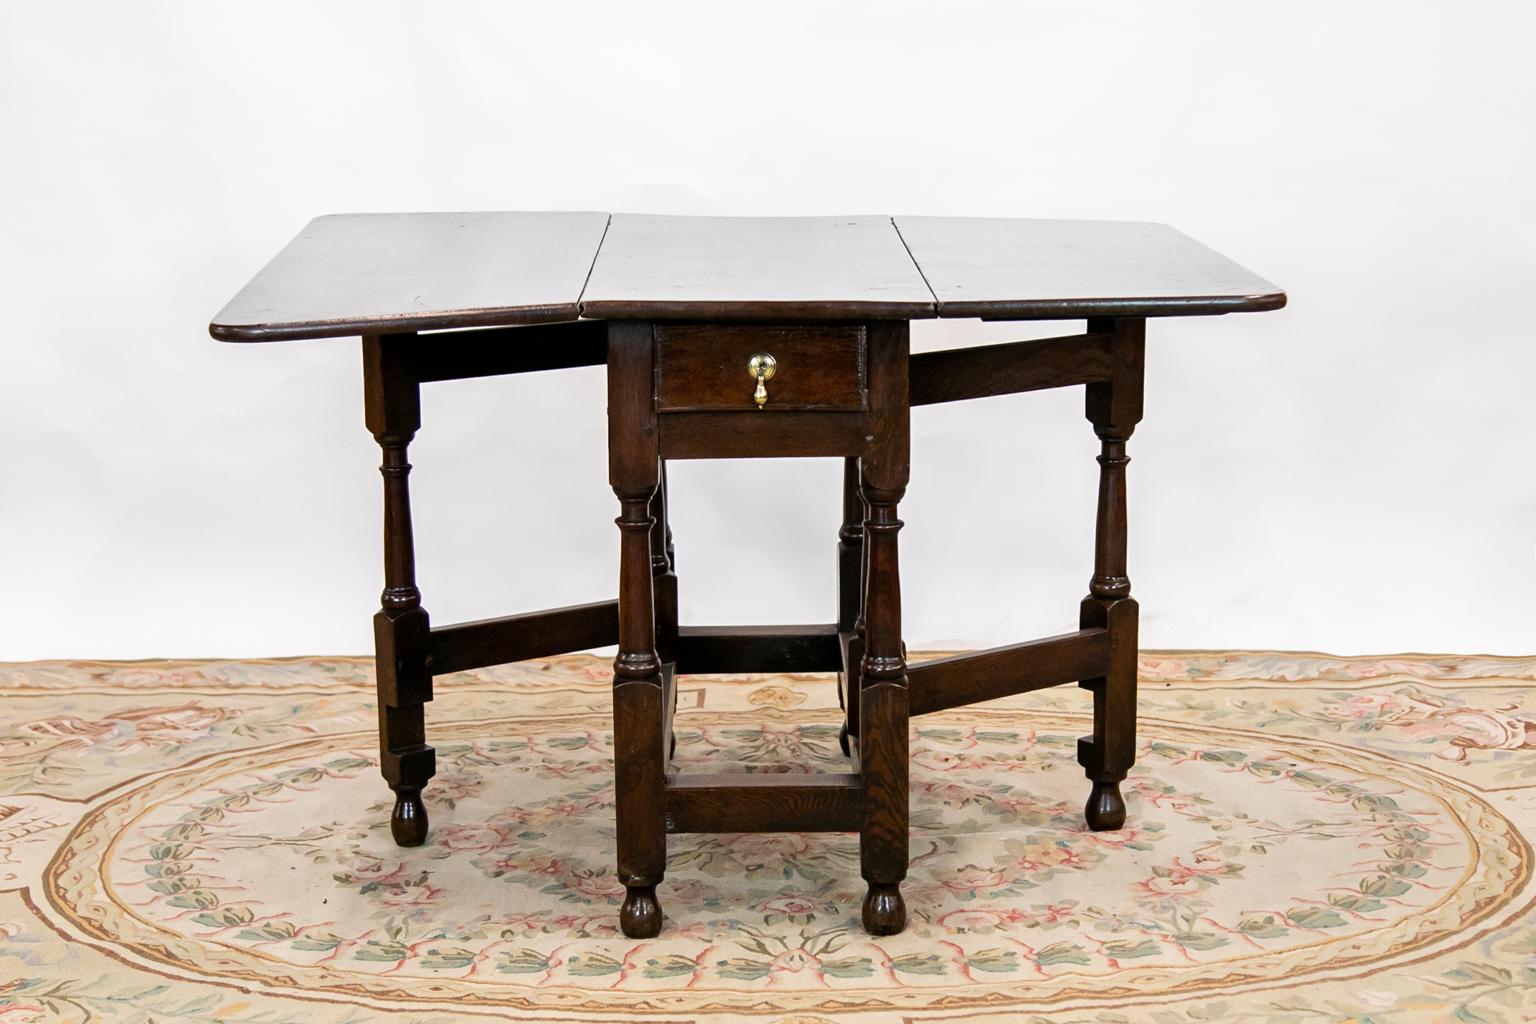 This gate leg table has a drawer with incised thumb nail molding and a brass tear drop pull, which is old but not original. There is exposed peg construction. 
Width of the table closed: 16.25